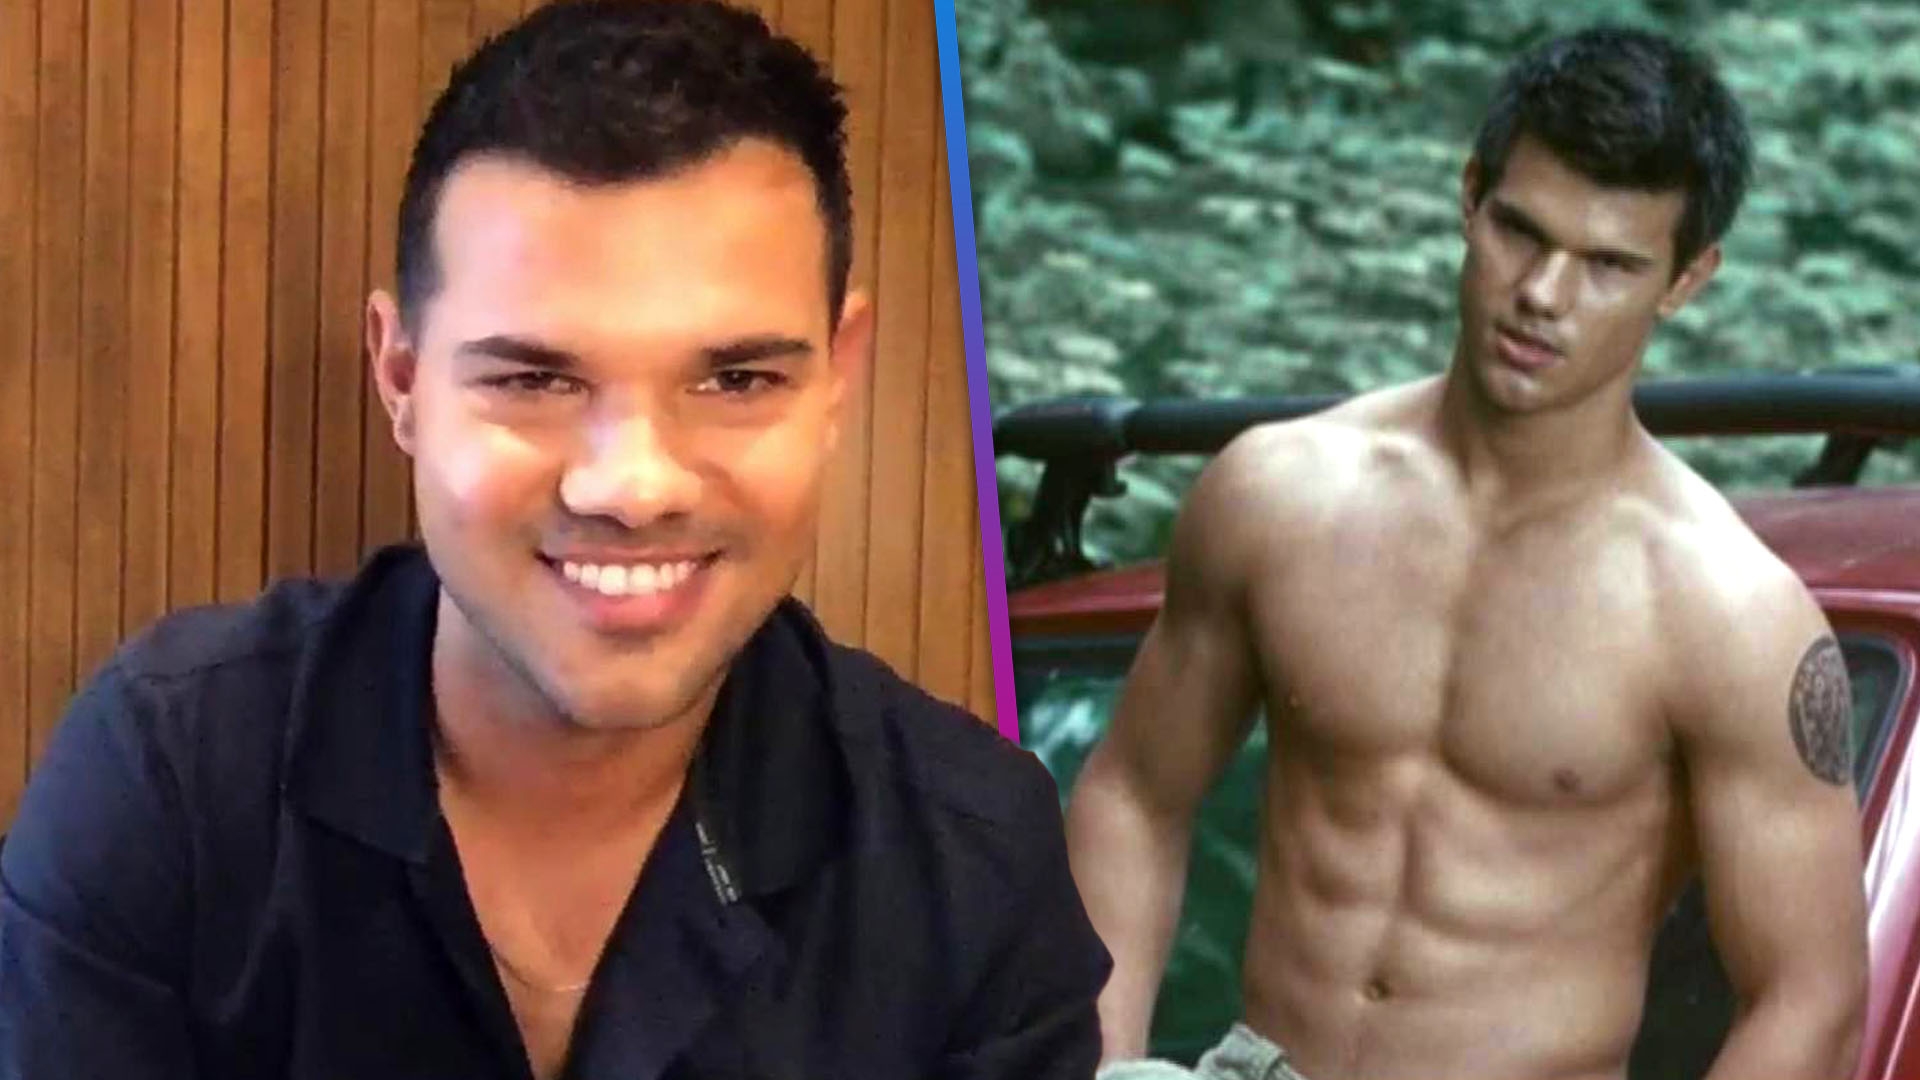 taylor lautner muscle 2022